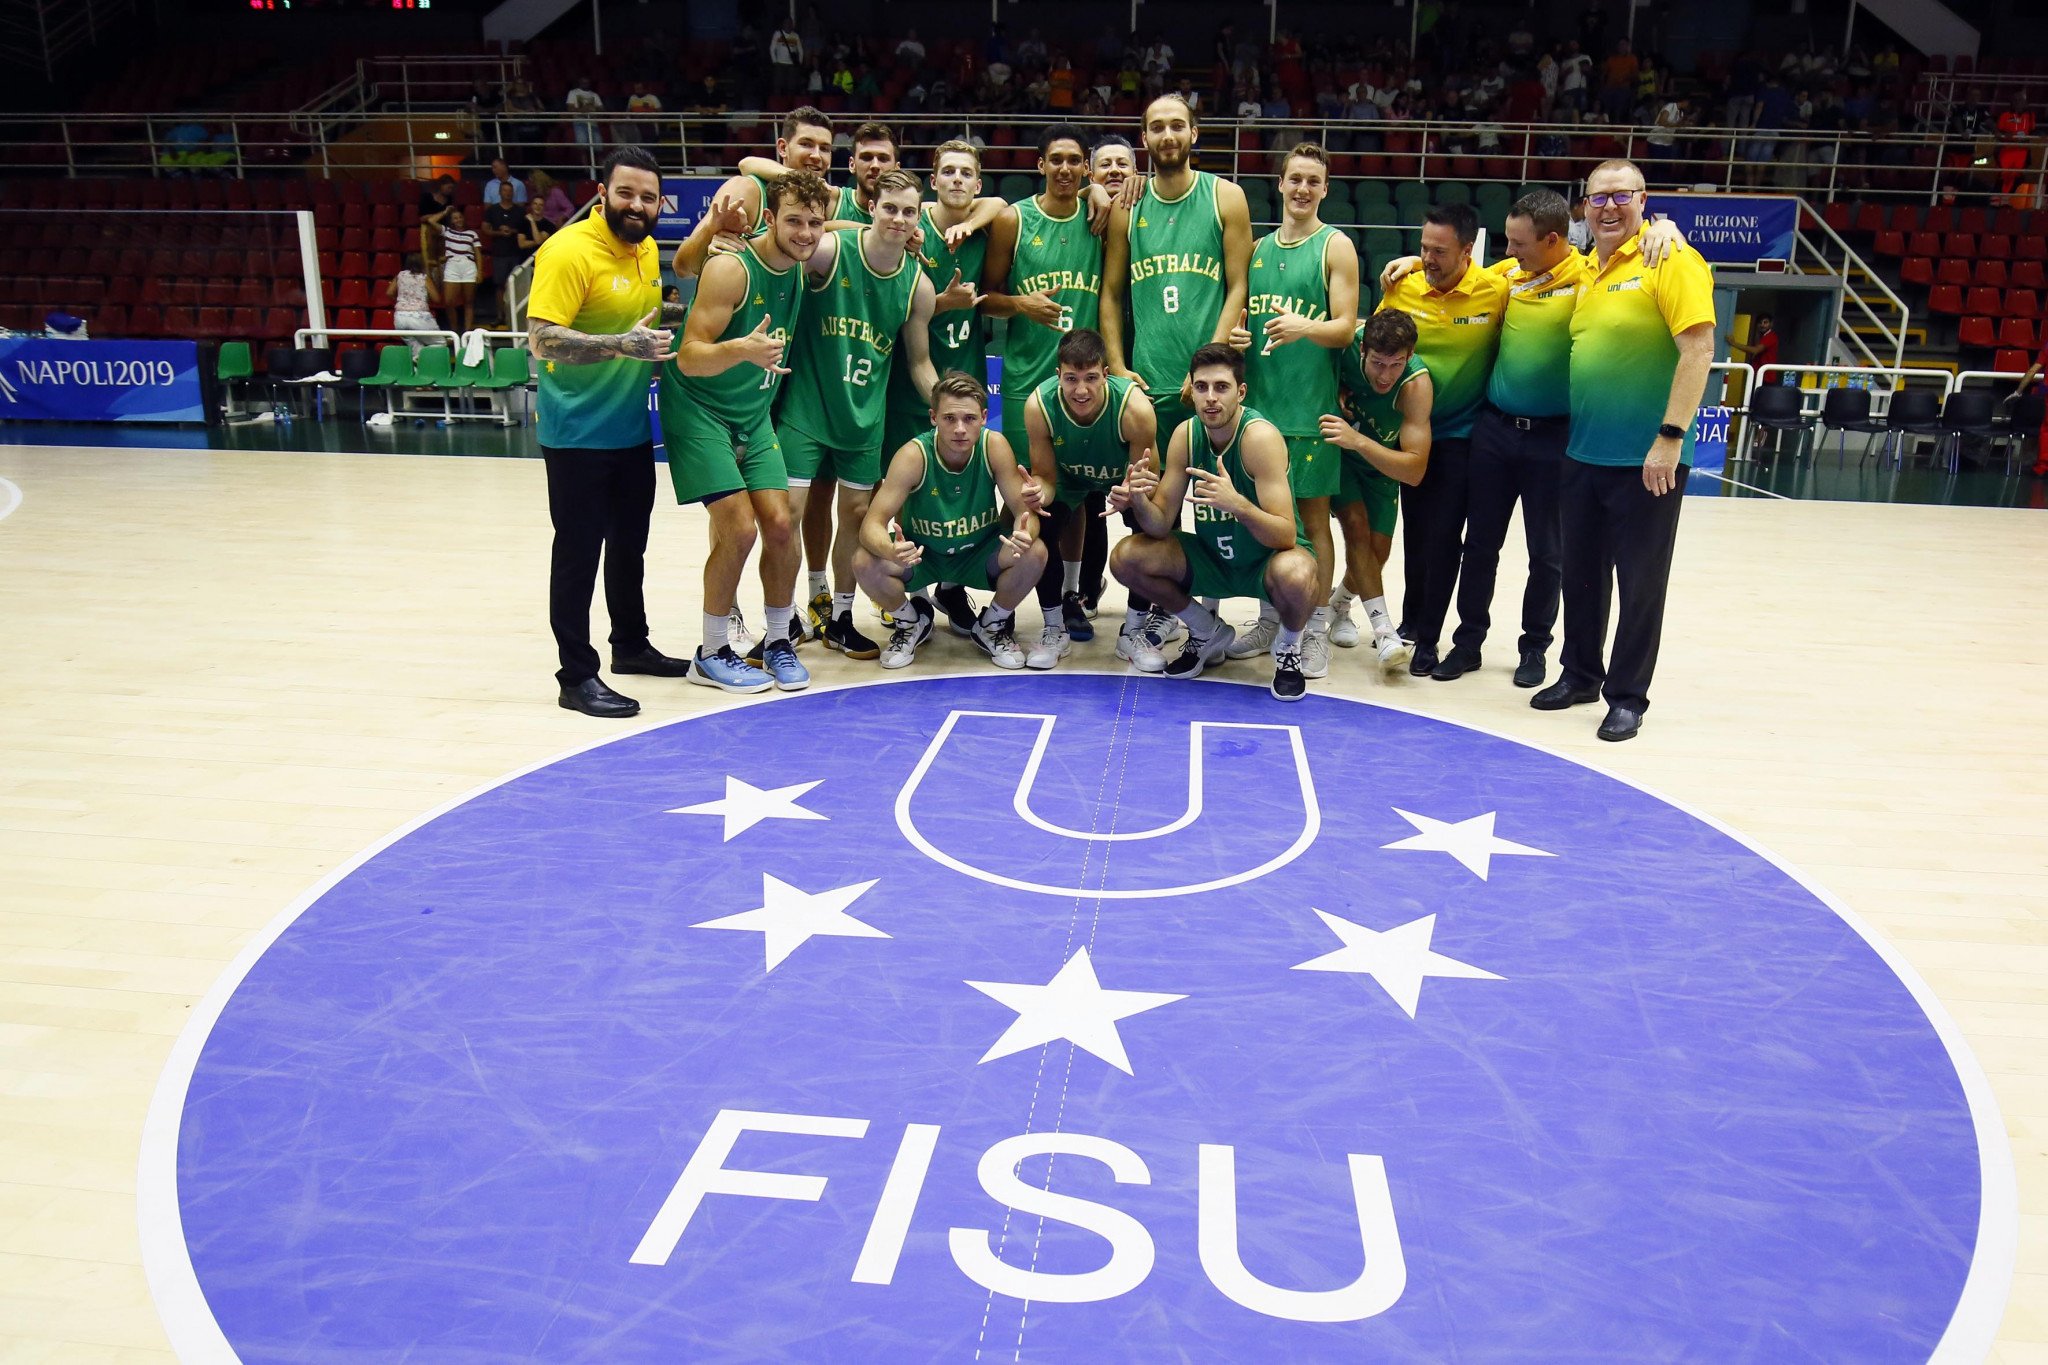 Australia claimed the bronze medal with victory against Israel ©Naples 2019